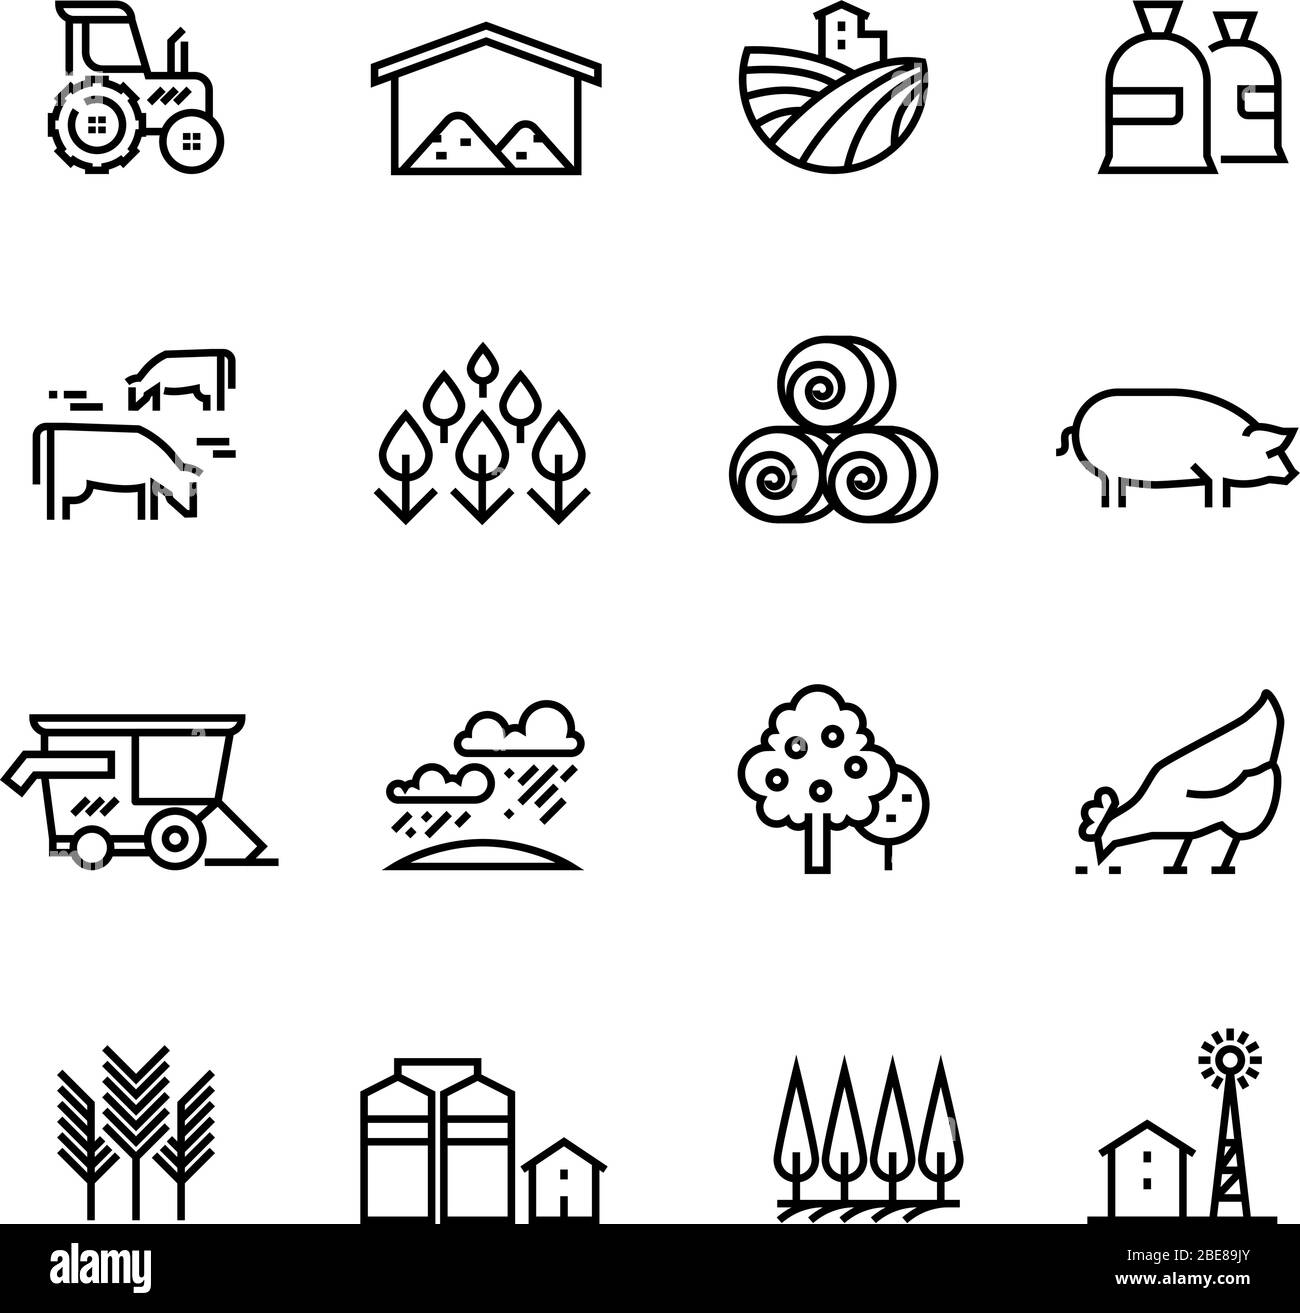 Farm harvest linear vector icons. Agronomy and farming pictograms. Agricultural symbols, farm field, agricultural equipment, tractor transport illustration Stock Vector